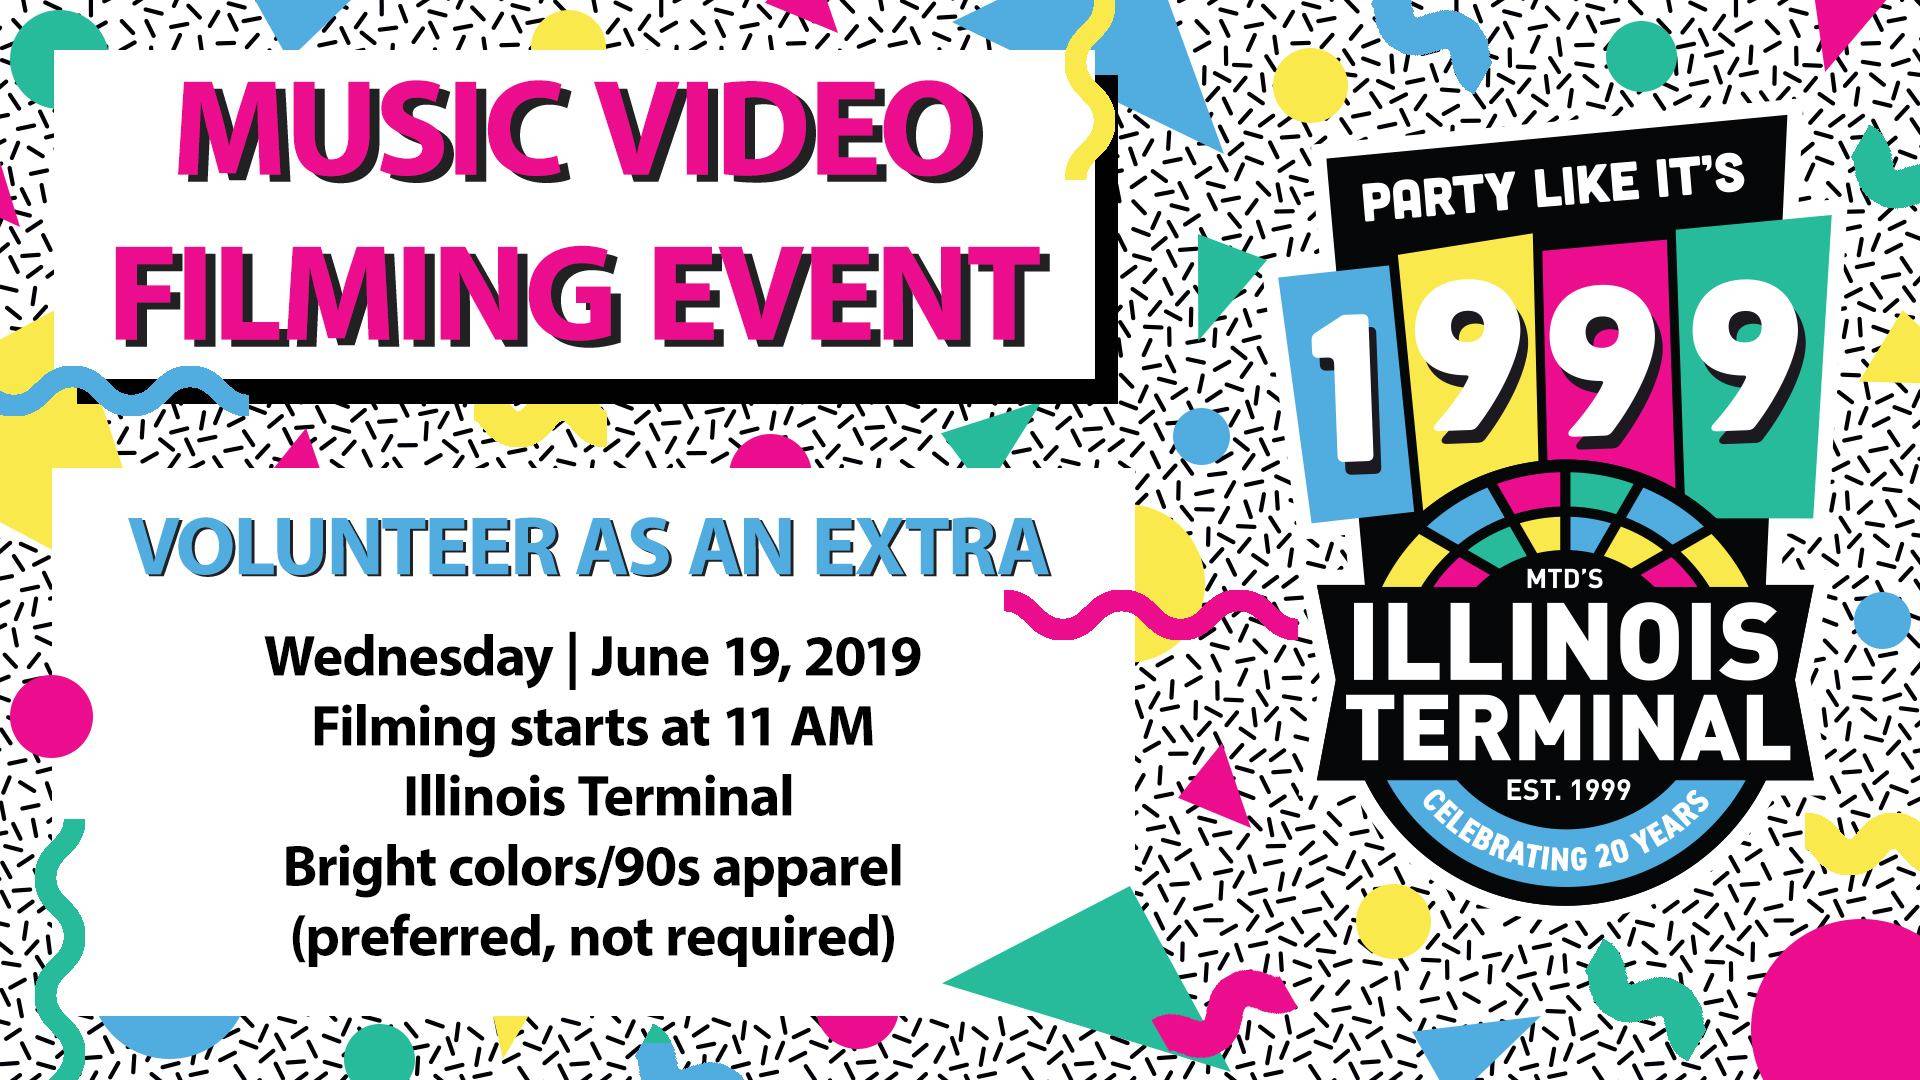 You can be part of MTD’s 90’s-themed video recording tomorrow